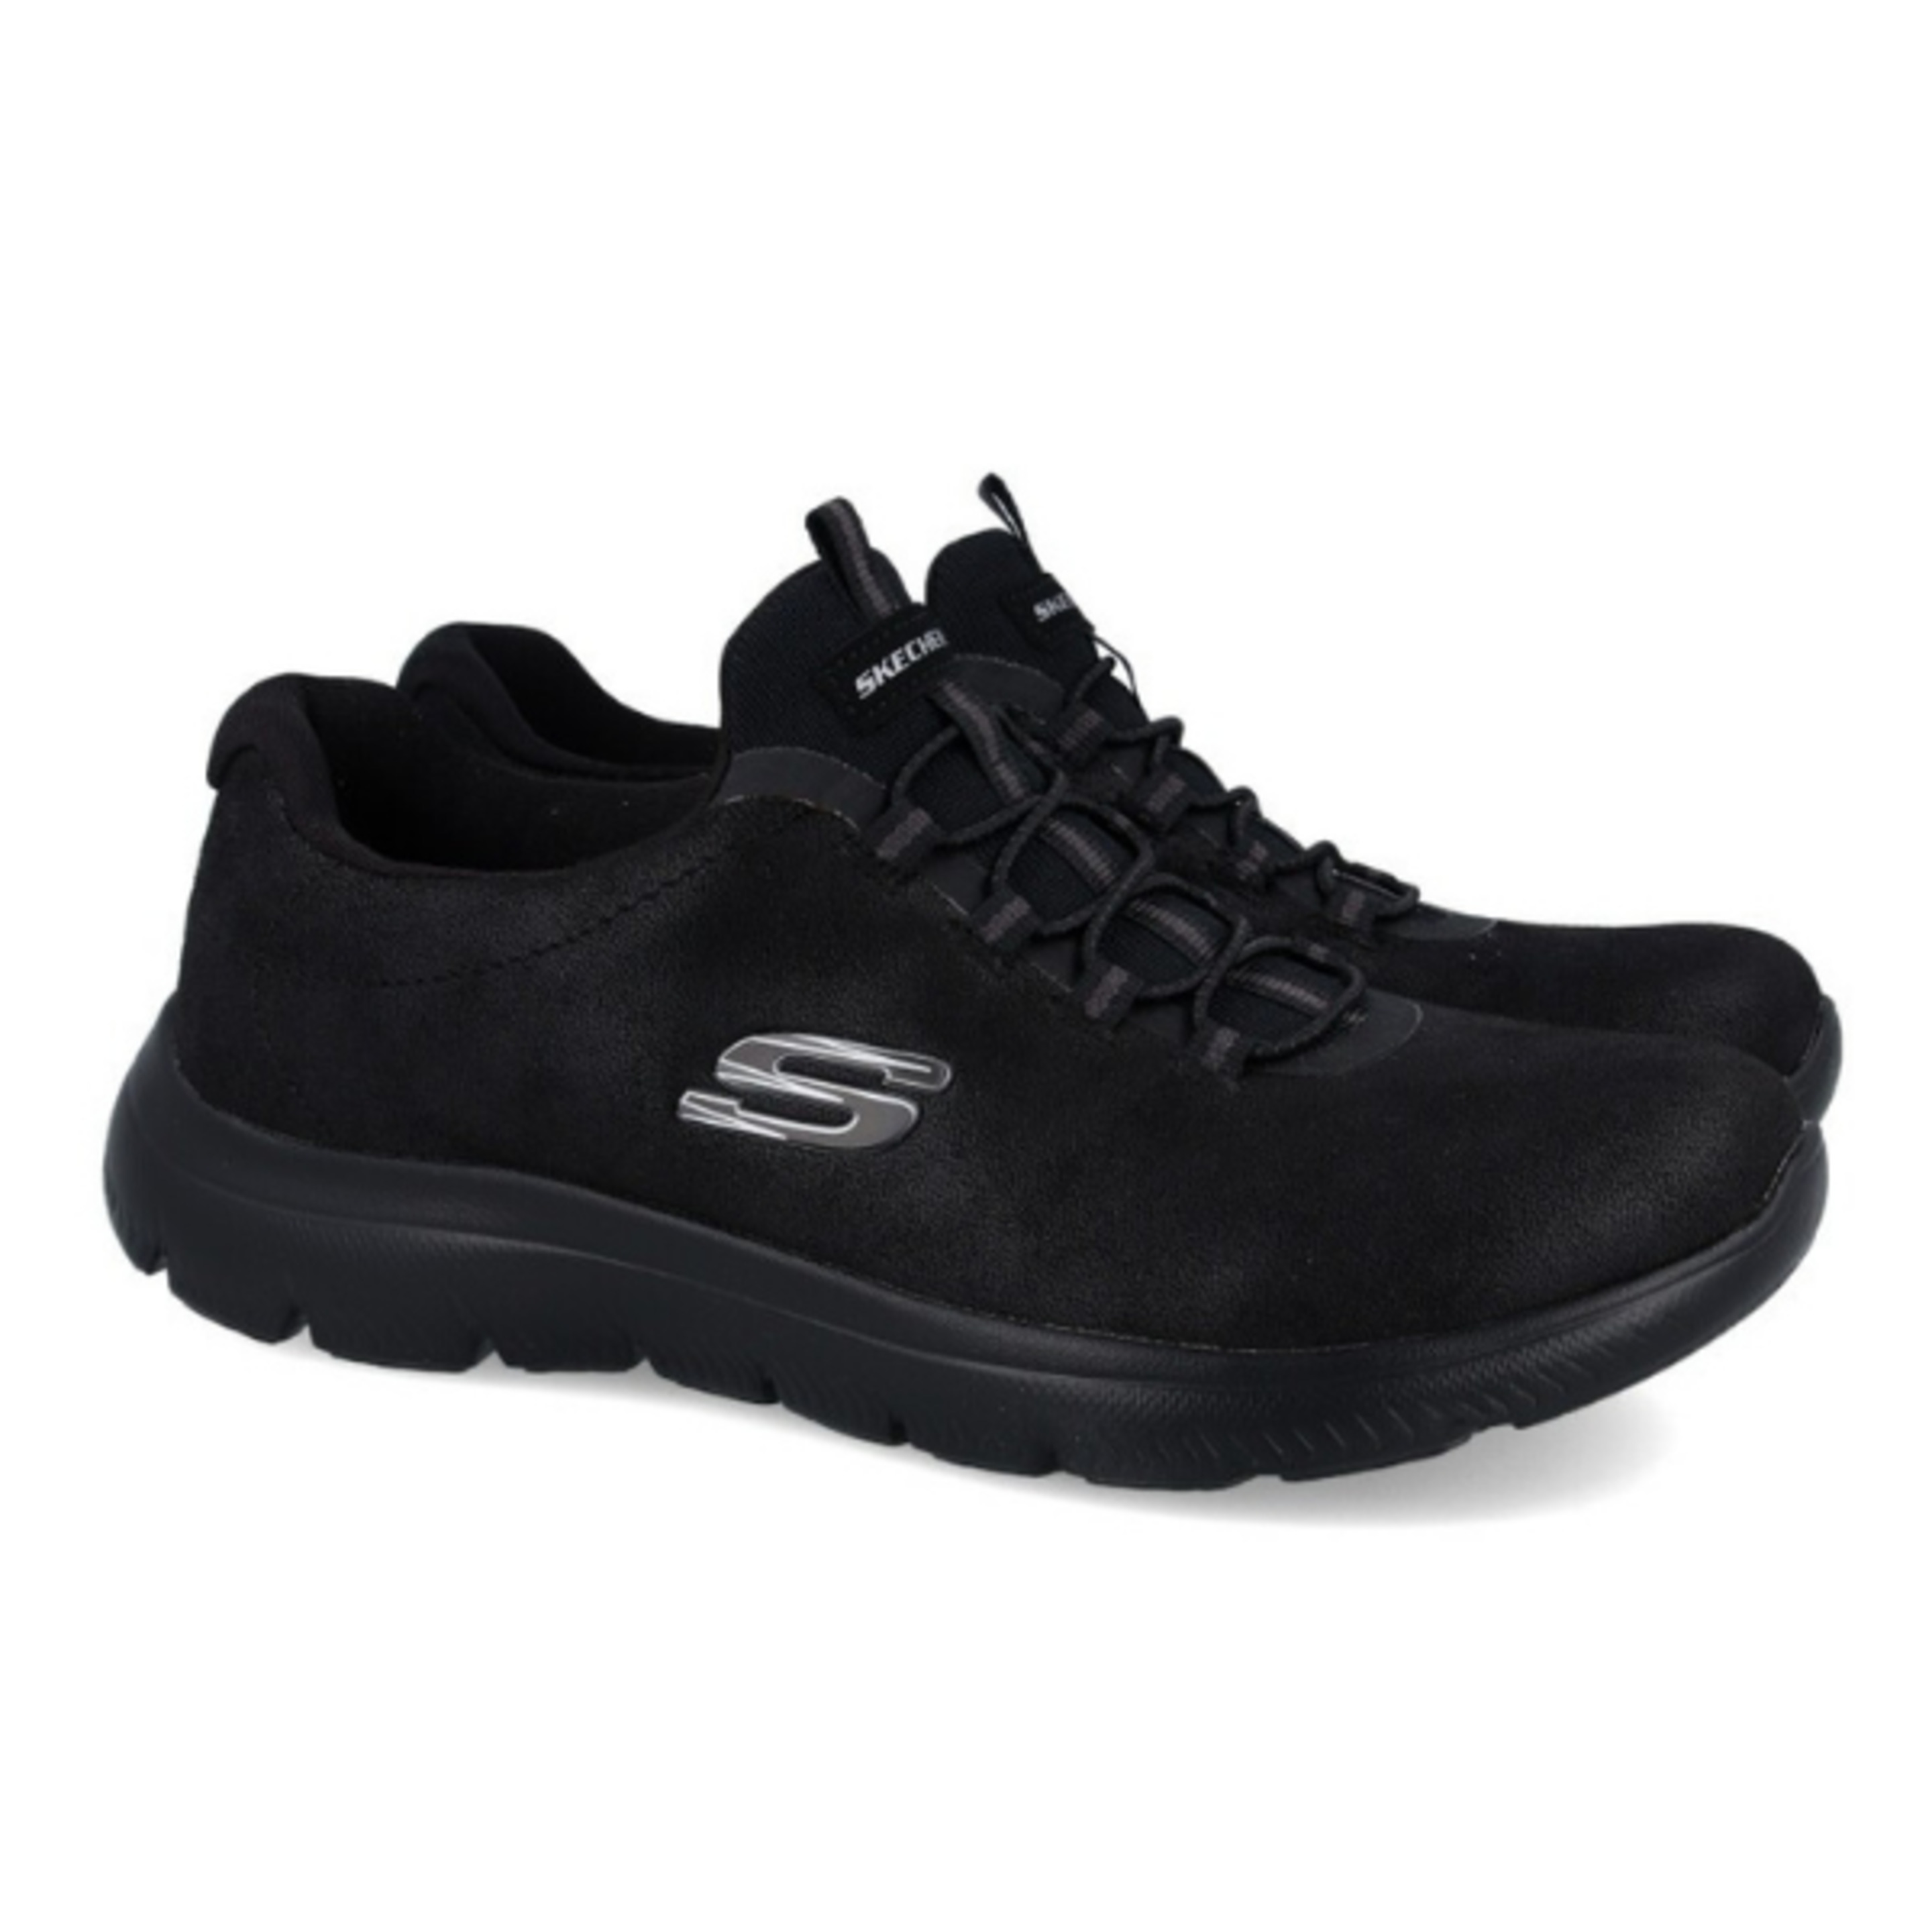 Sapatilhas Skechers Summiths - Oh So Smooth. 149200/bbk